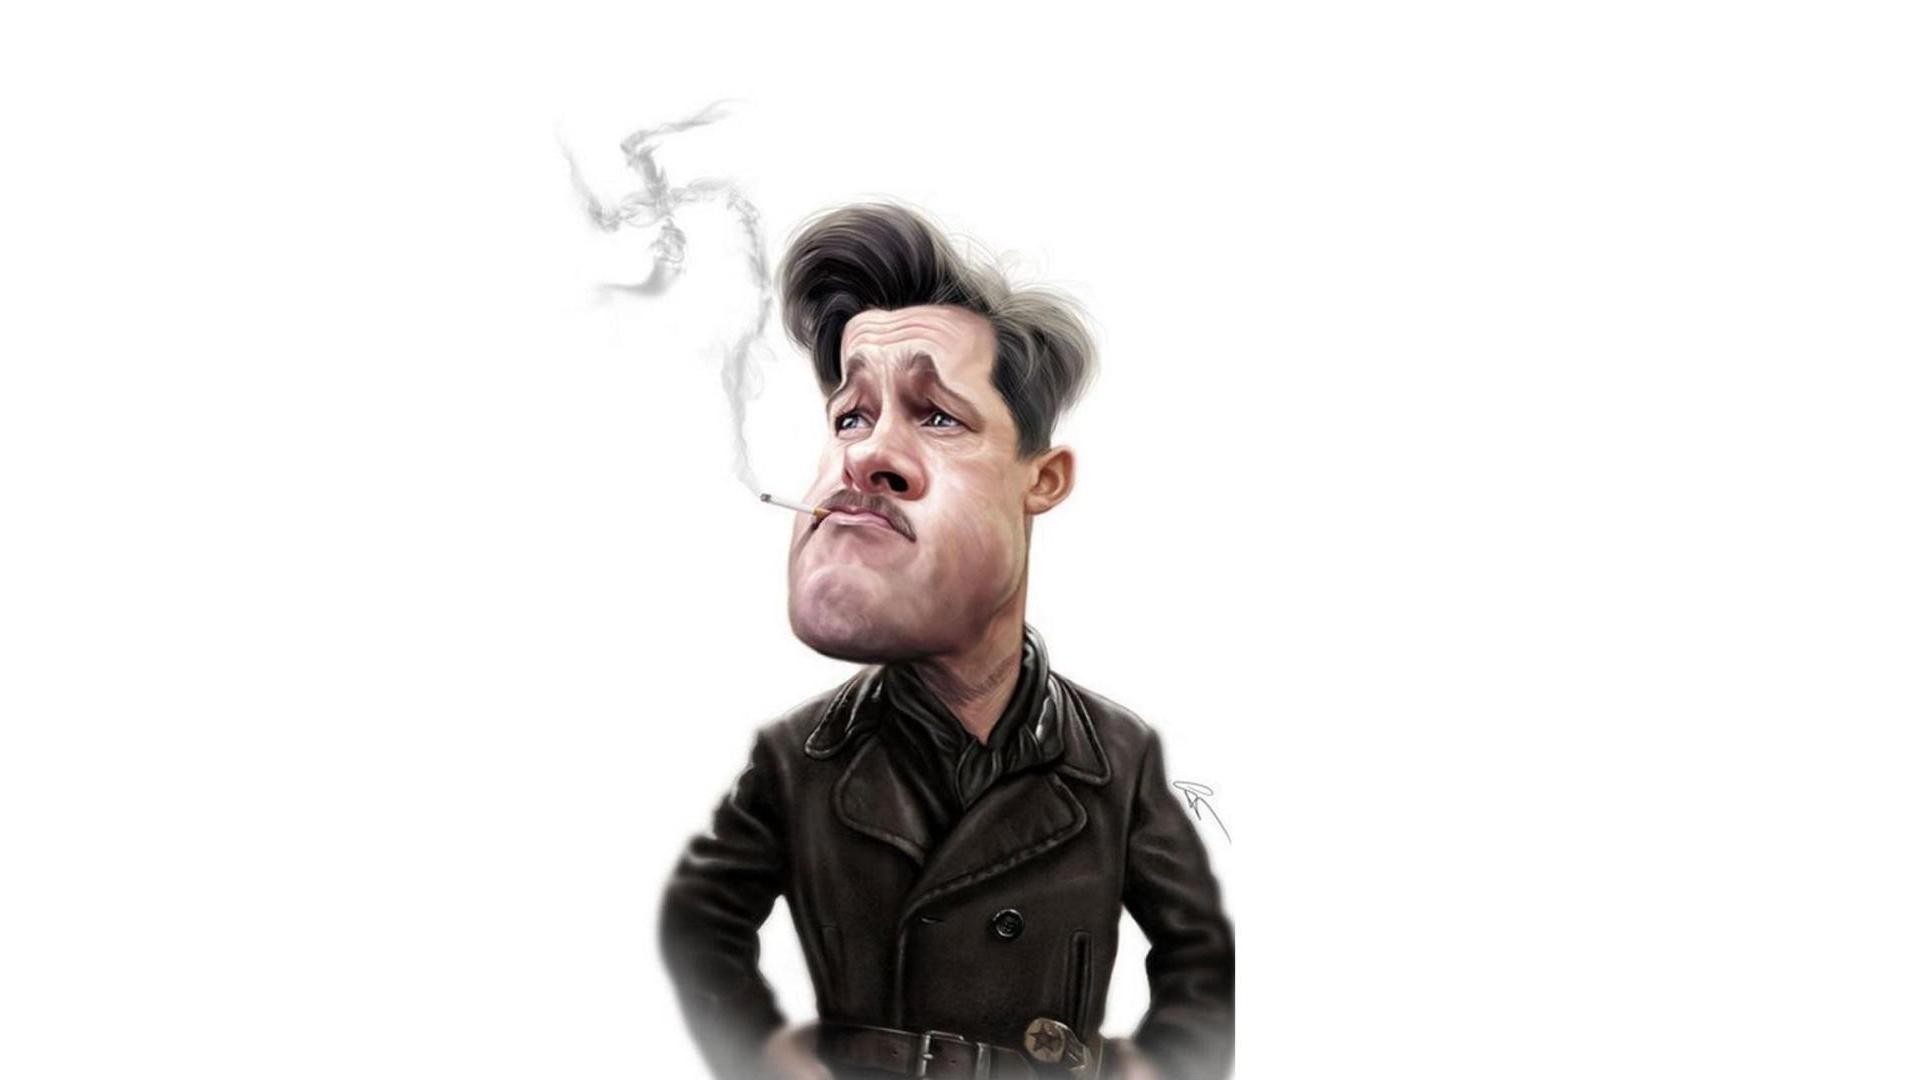 inglourious basterds wallpaper,facial expression,forehead,gesture,illustration,photography